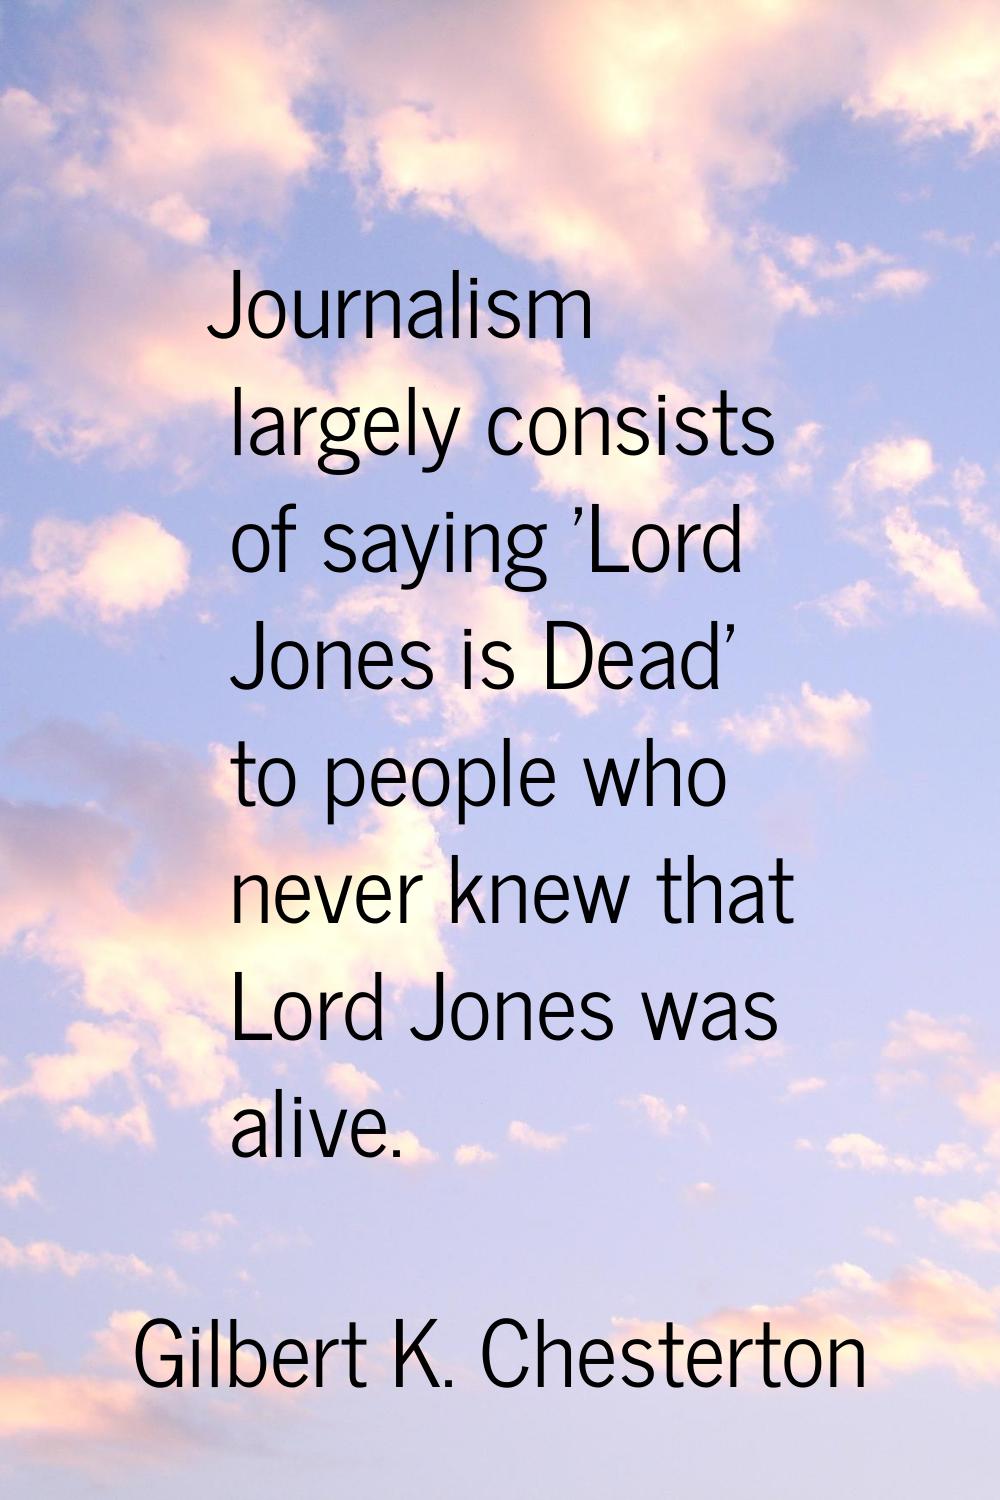 Journalism largely consists of saying 'Lord Jones is Dead' to people who never knew that Lord Jones